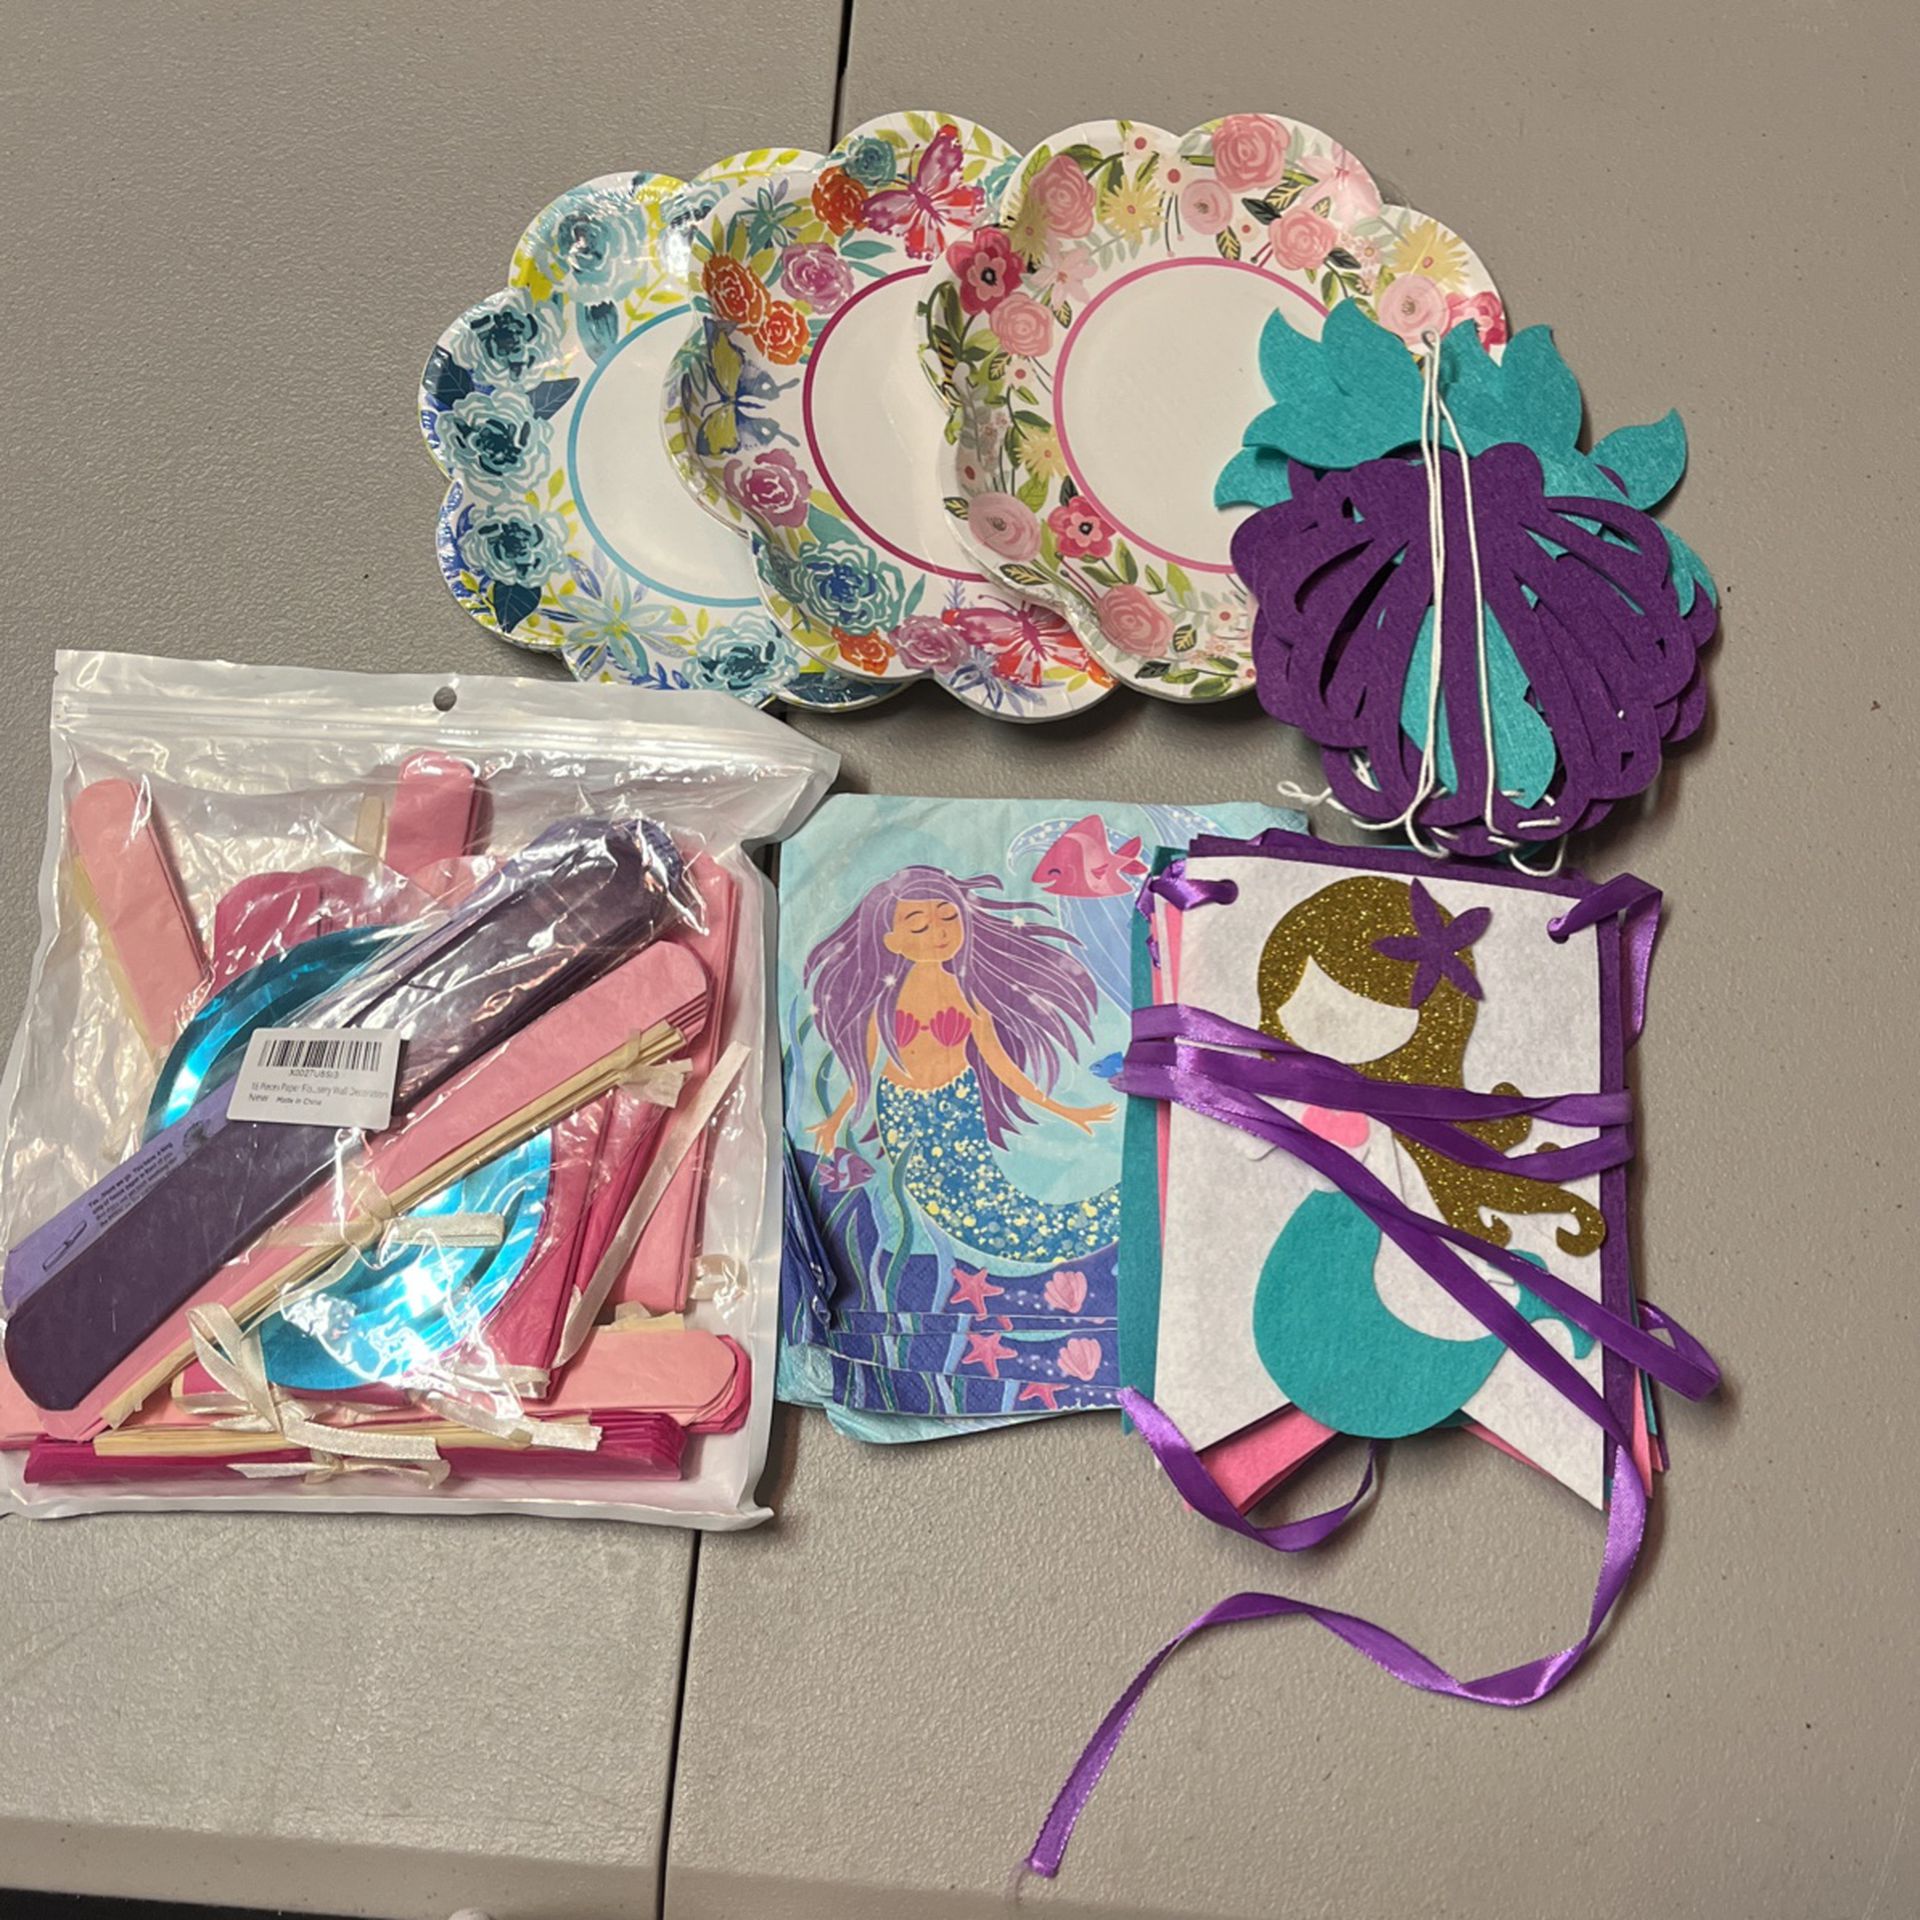 Mermaid Birthday Party Supplies Free With Donation